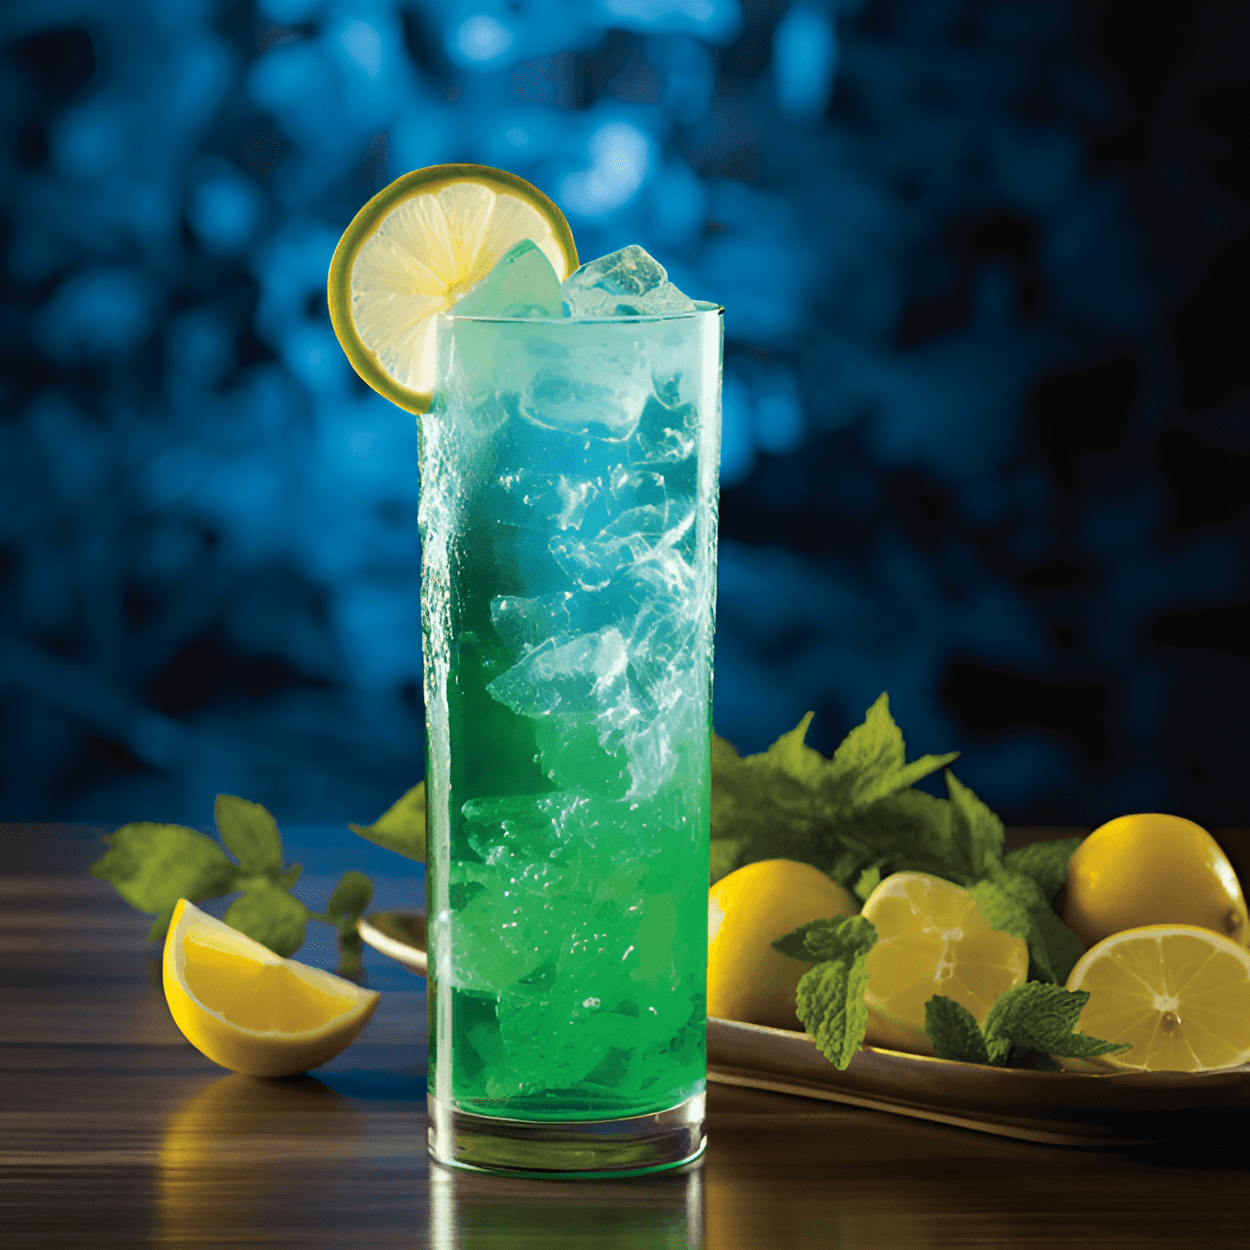 Windex Recipe - The Windex cocktail is a sweet, fruity, and slightly tart cocktail. It has a tropical taste, with a strong blue curacao flavor, balanced by the tartness of the lemon-lime soda and the sweetness of the peach schnapps.